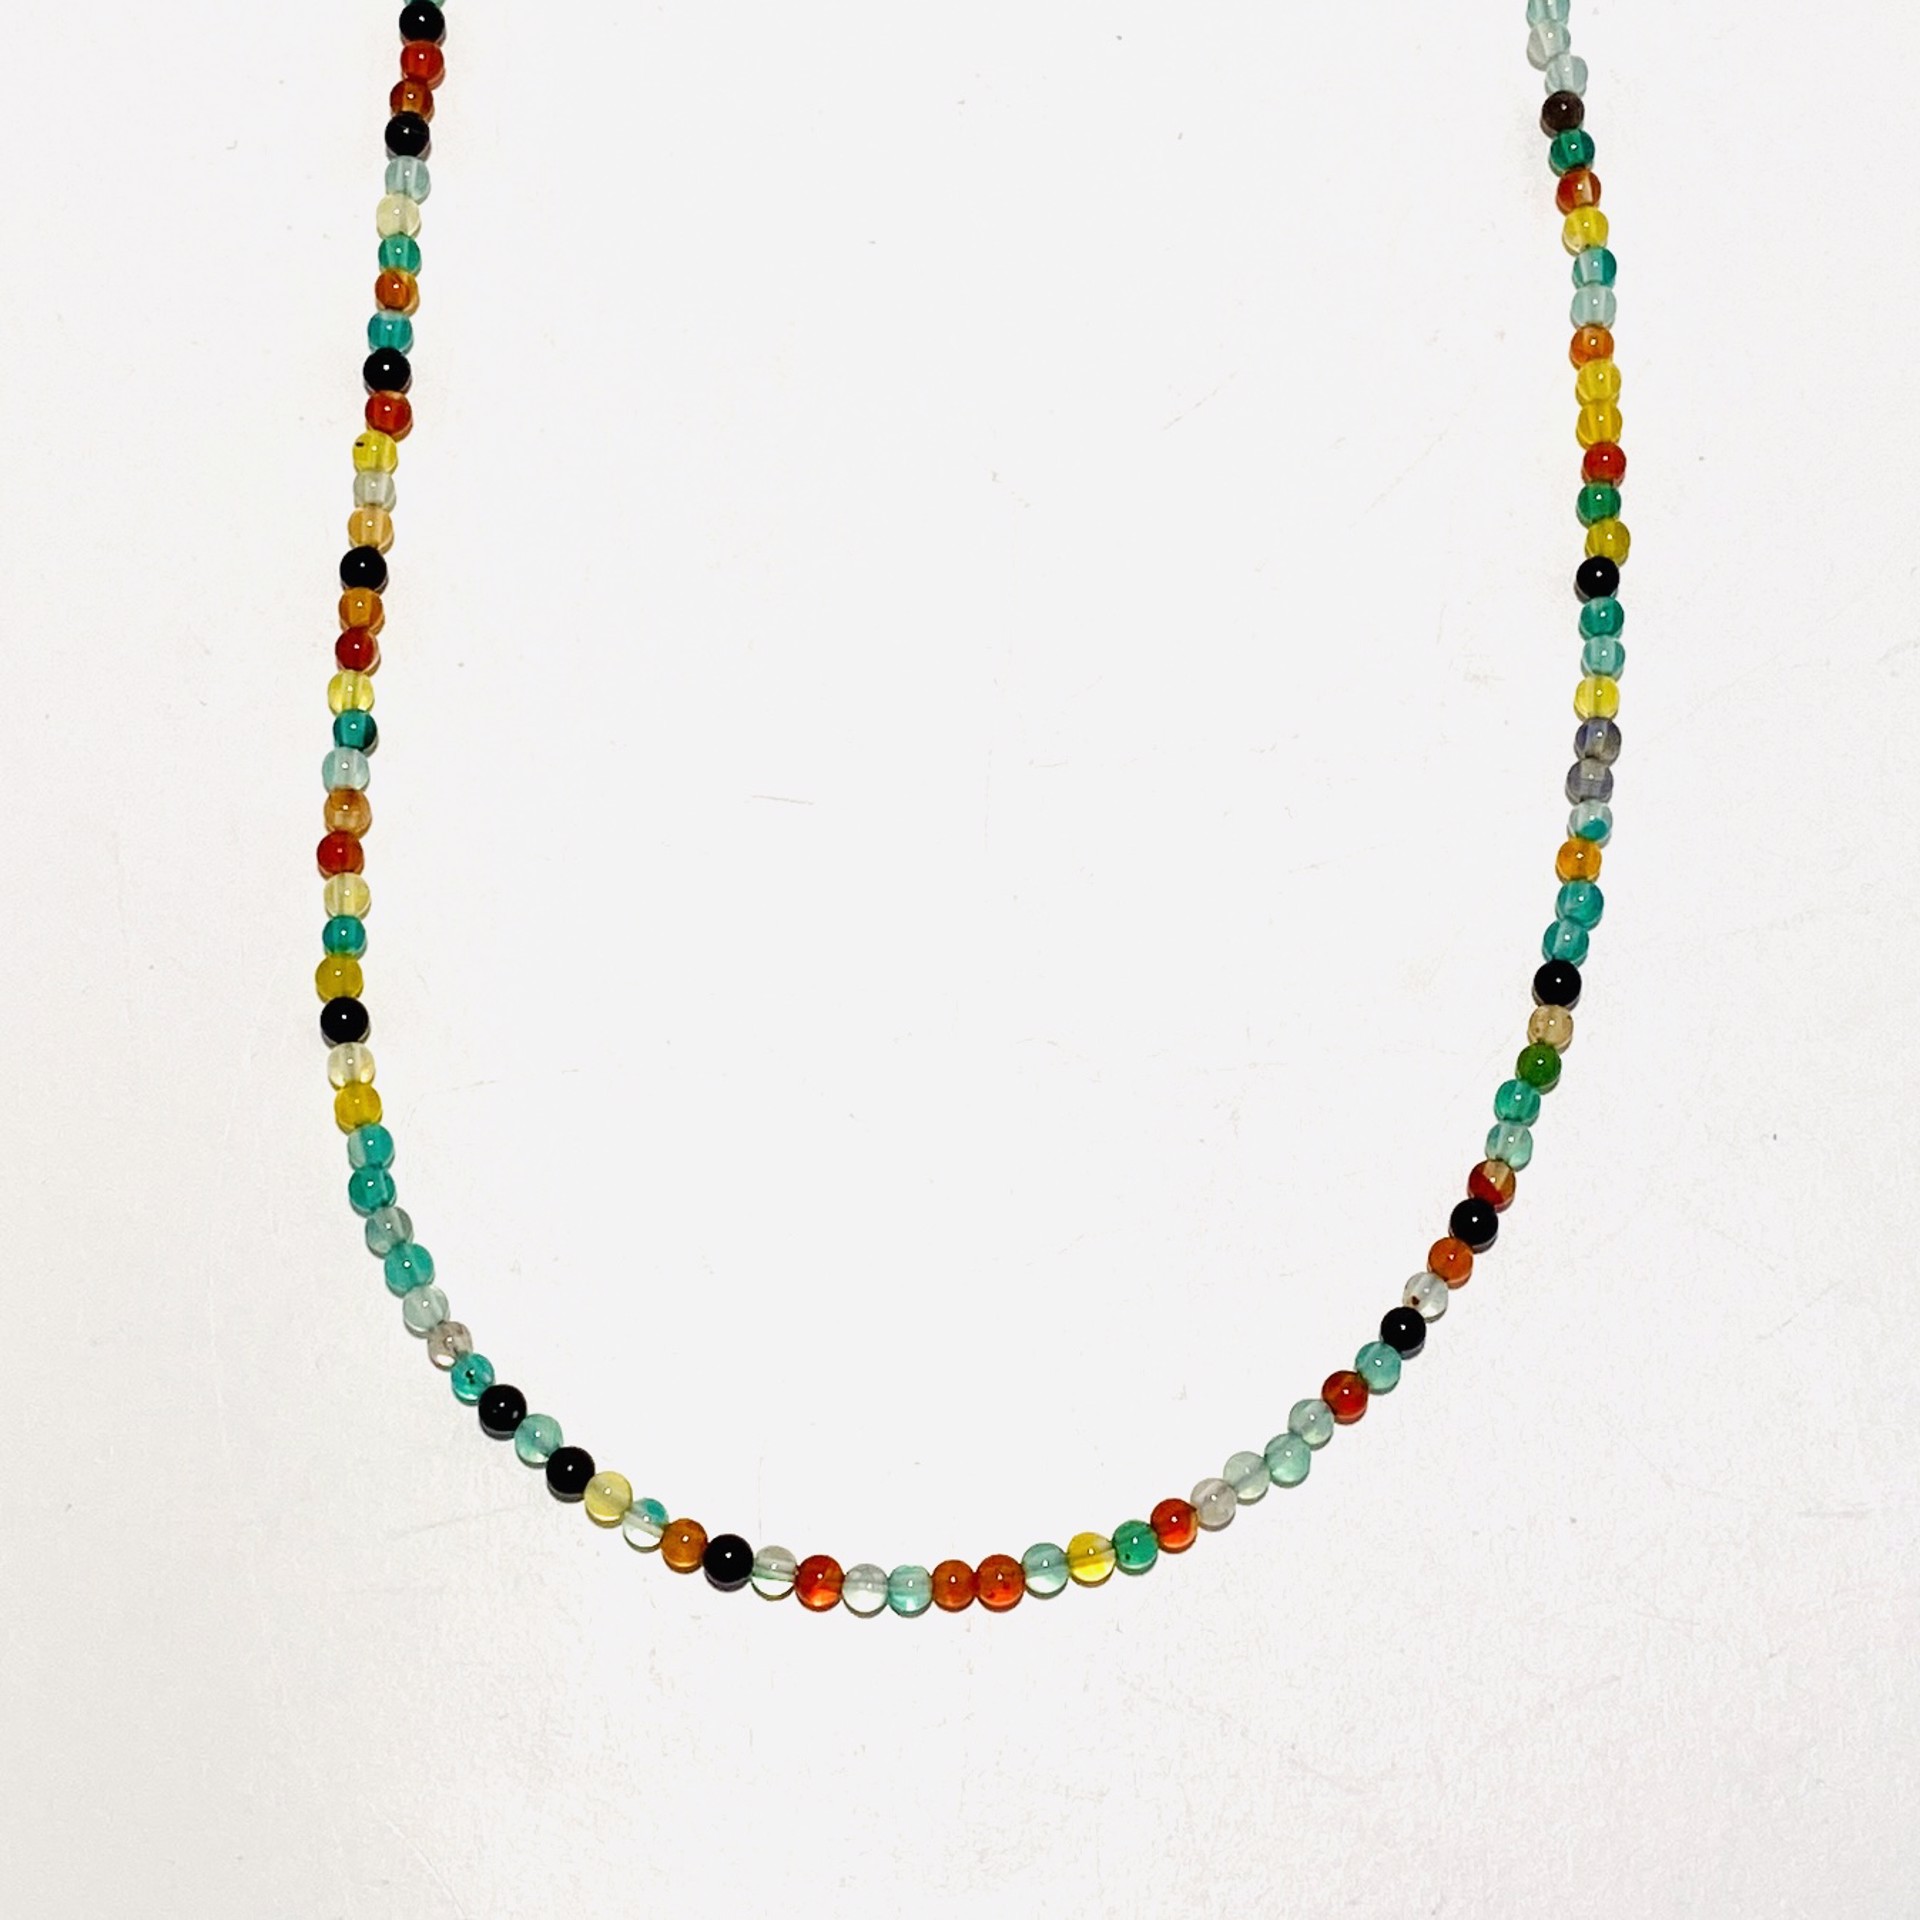 Faceted Tiny Mixed Gemstones Strand Necklace by Nance Trueworthy